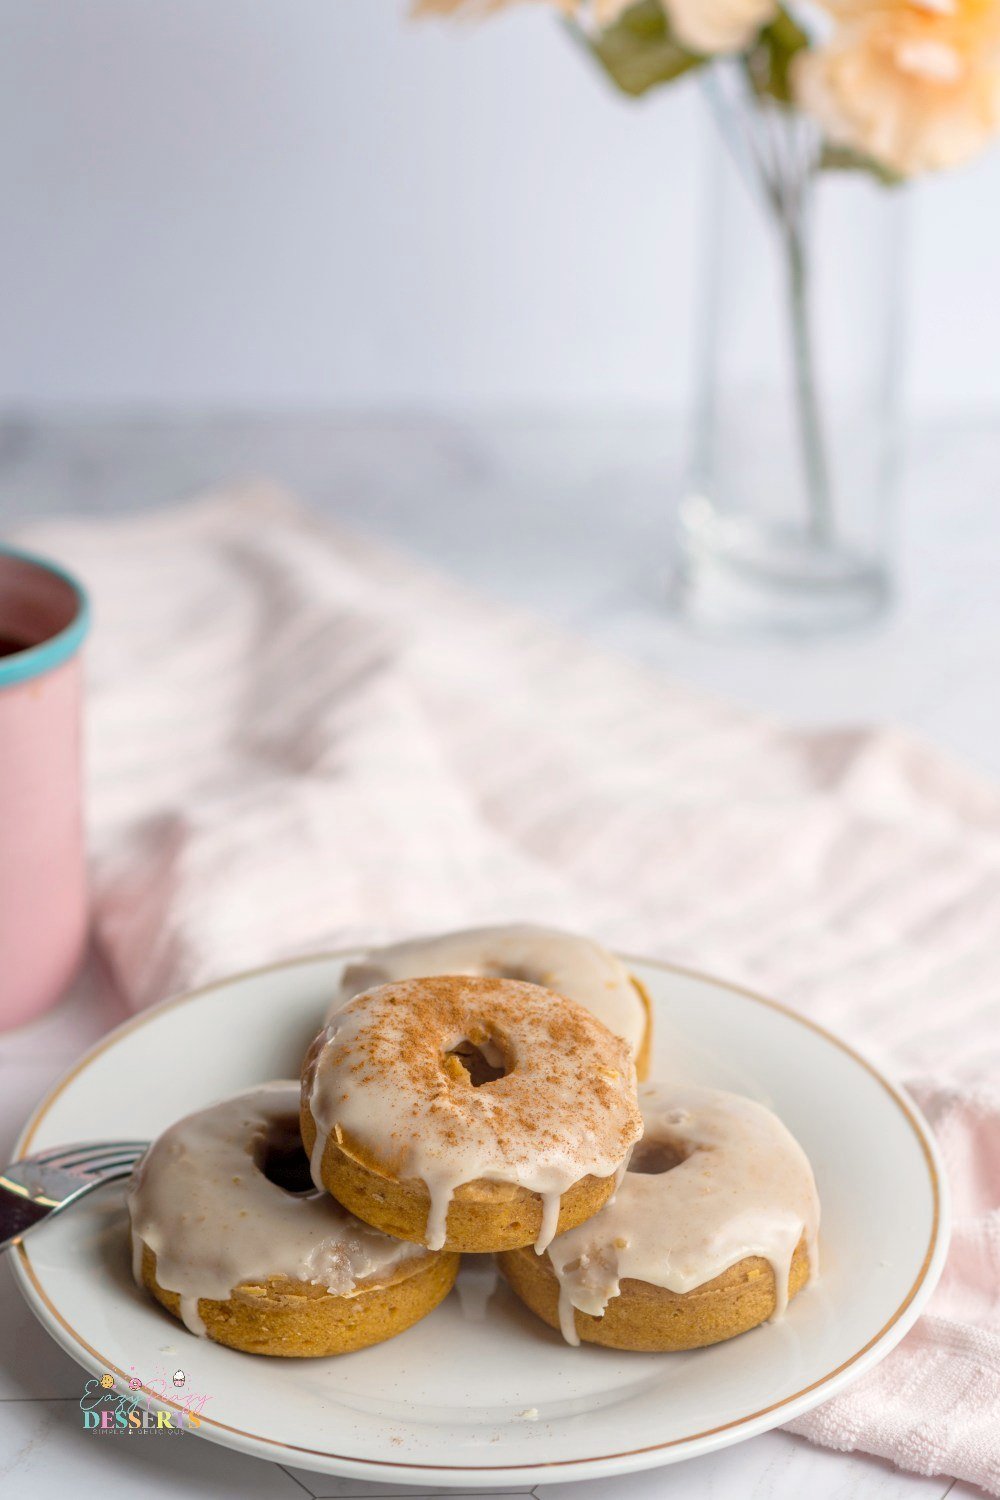 Three maple glazed donuts on a serving plate